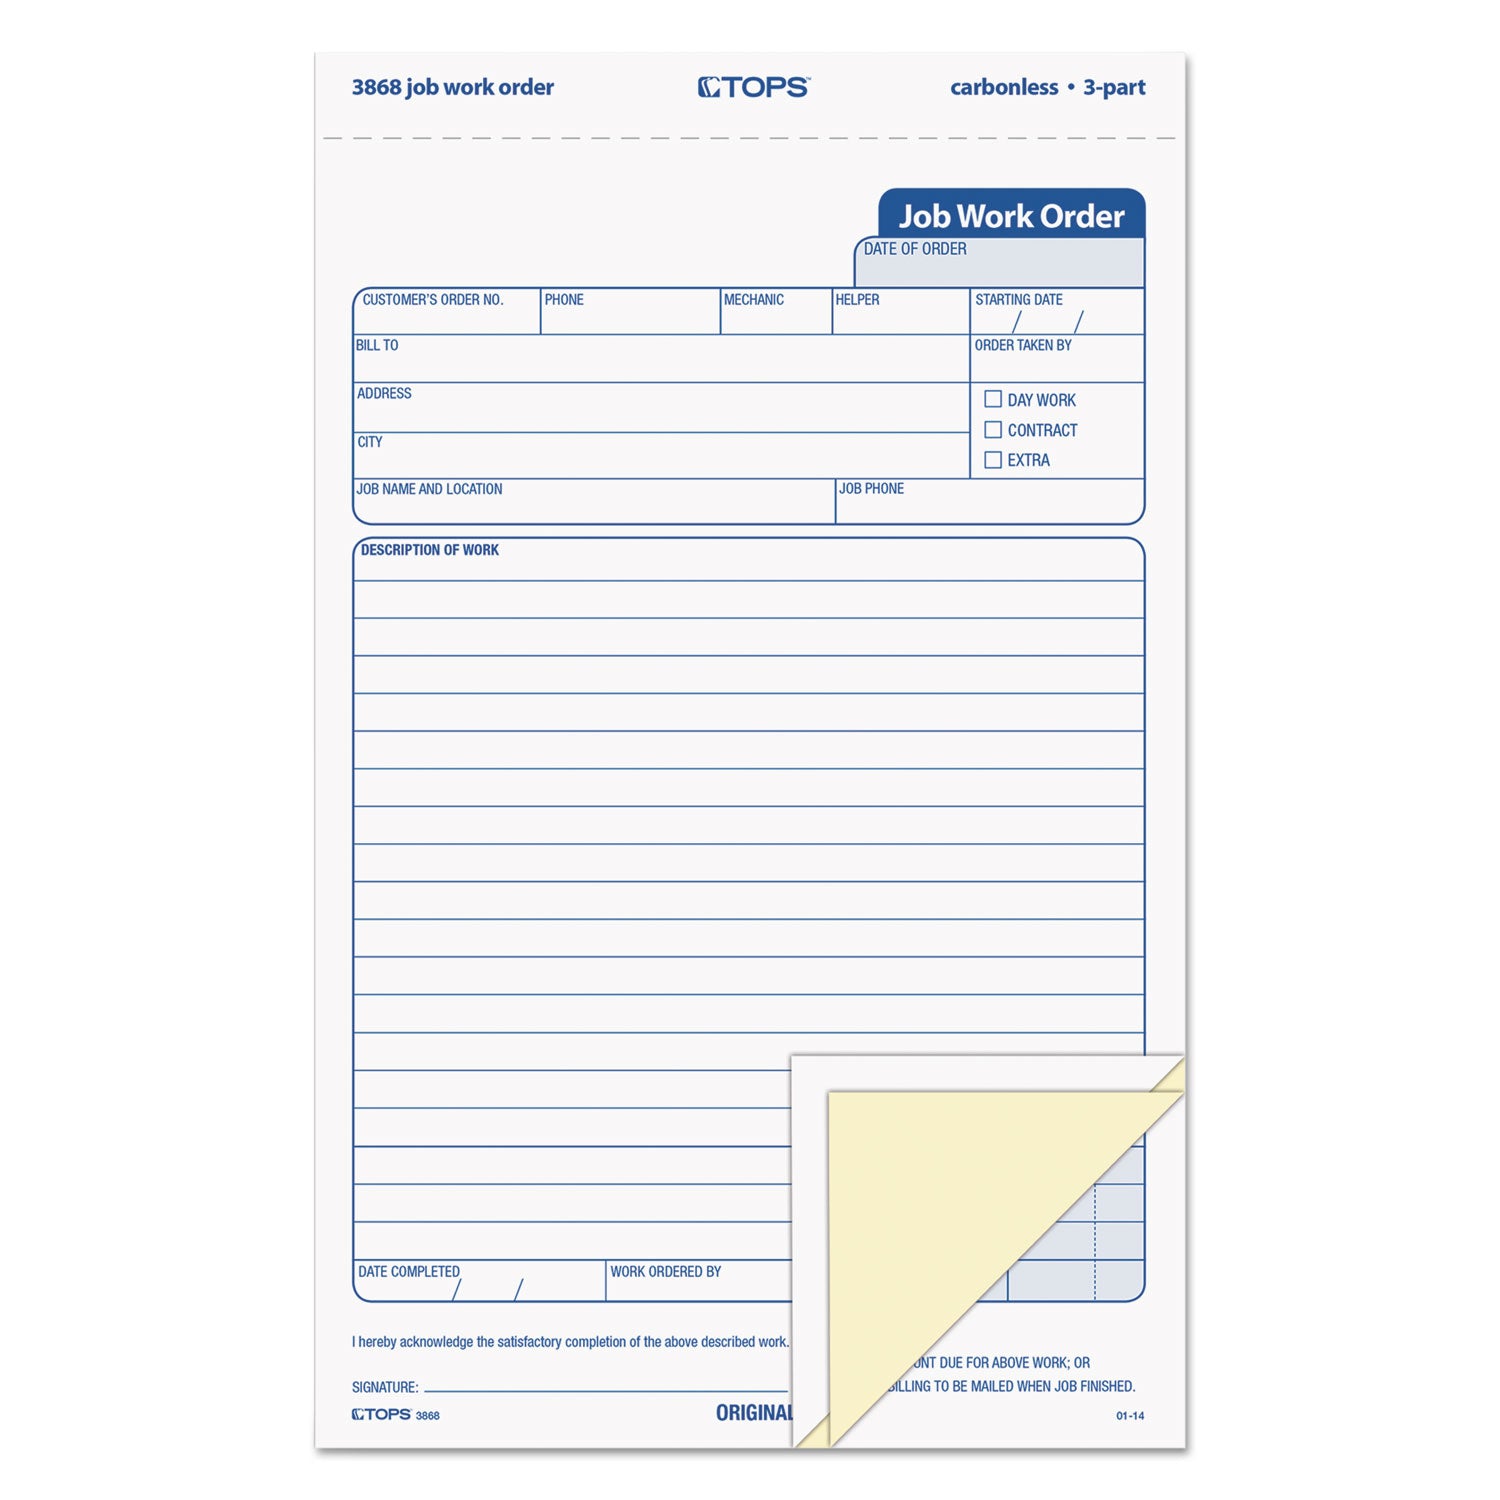 Job Work Order, Three-Part Carbonless, 5.66 x 8.63, 50 Forms Total - 